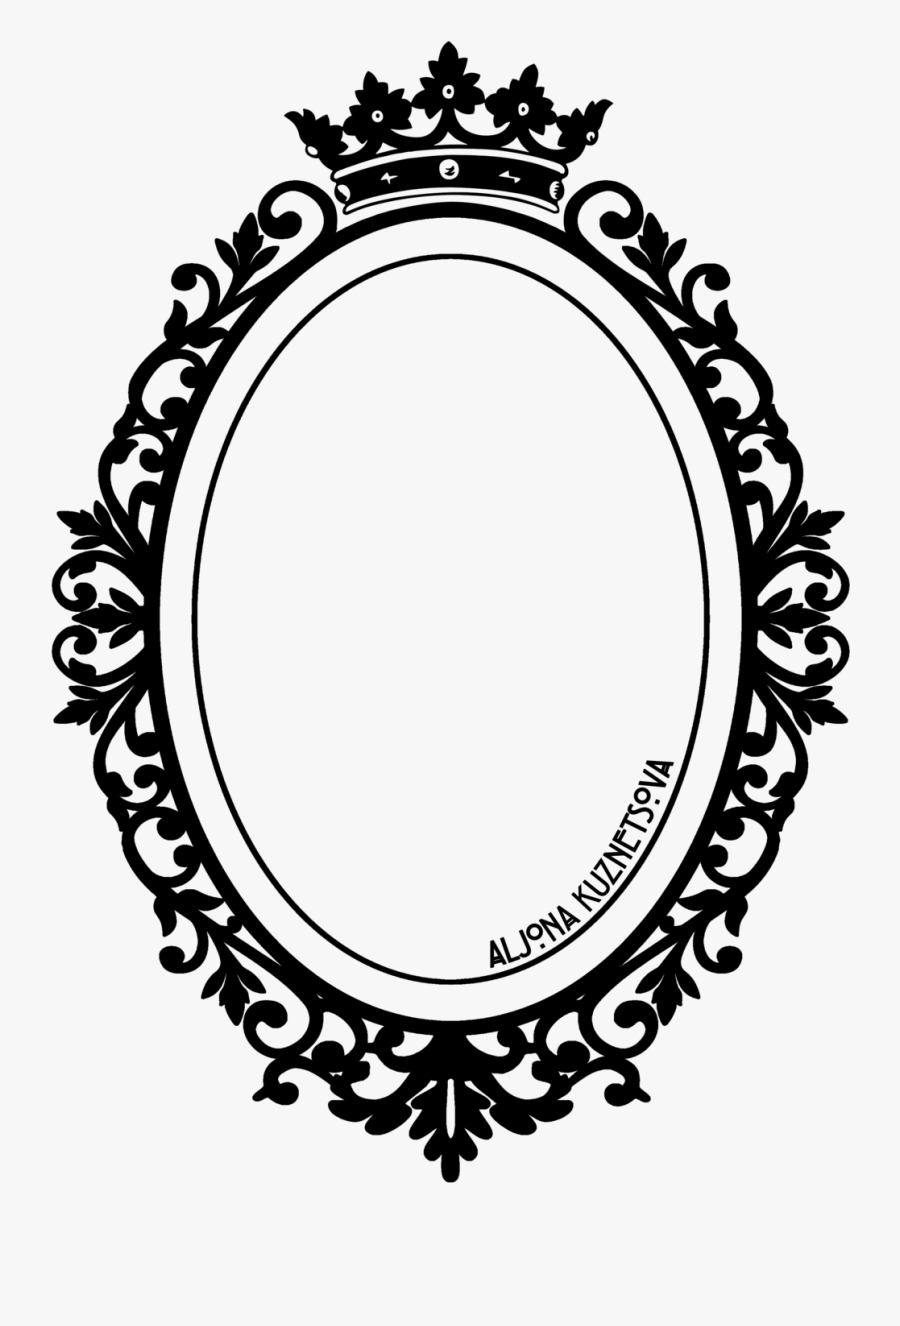 The Haunted Mansion Haunted House Silhouette Printmaking - Black Oval Frame Png, Transparent Clipart